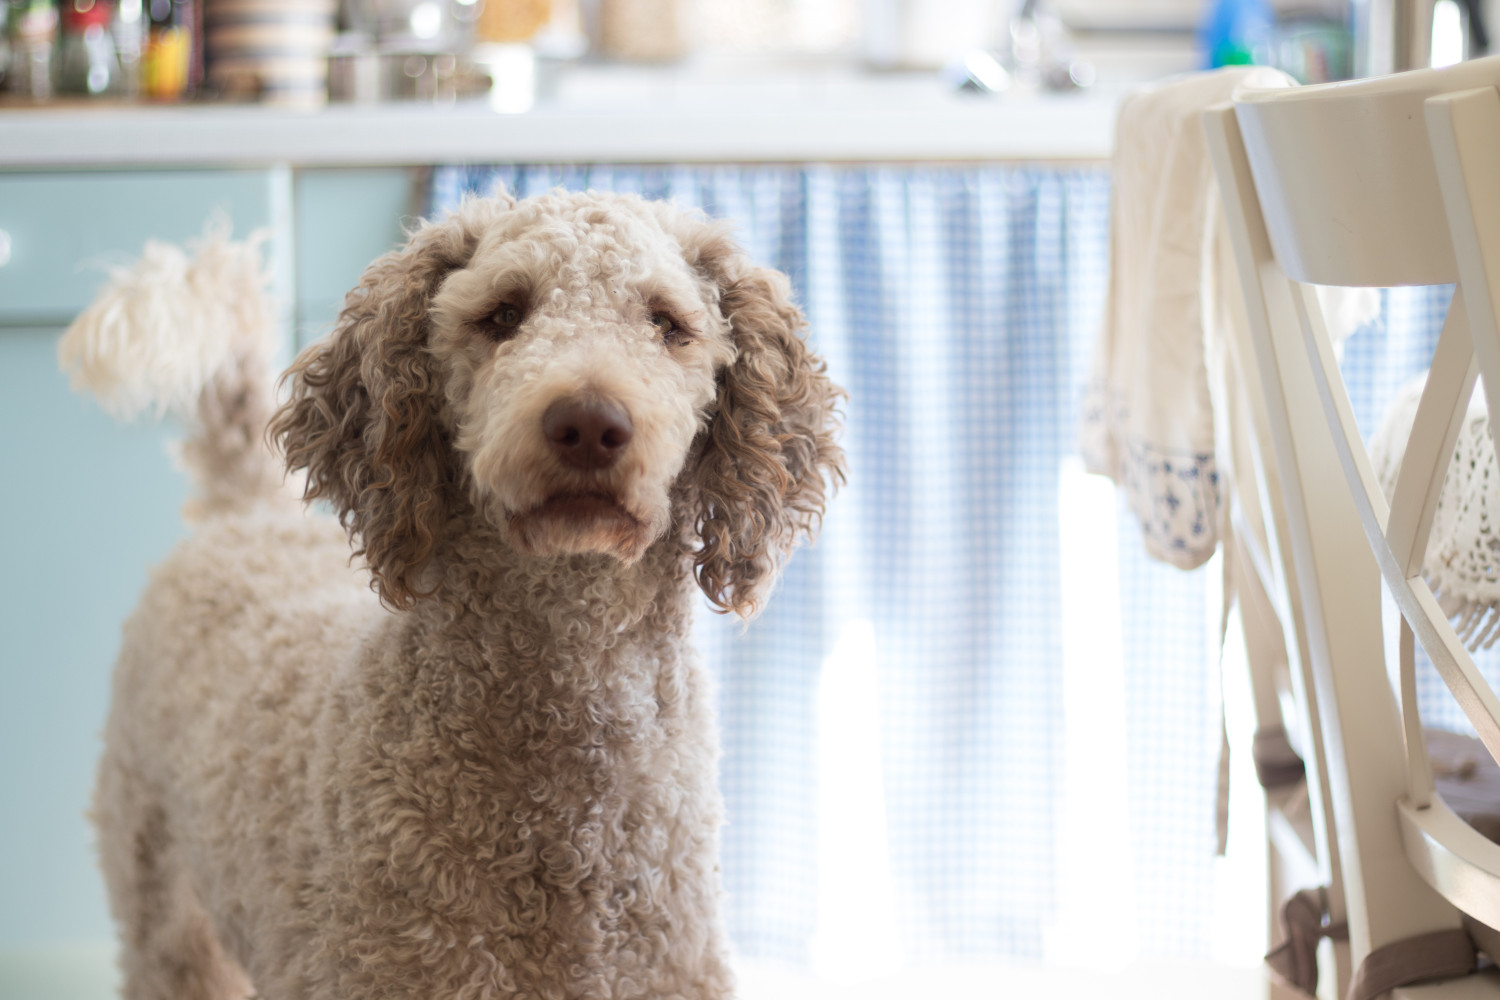 A Poodle standing a kitchen - Best Dog Breeds for Pet Therapy - Focus Care